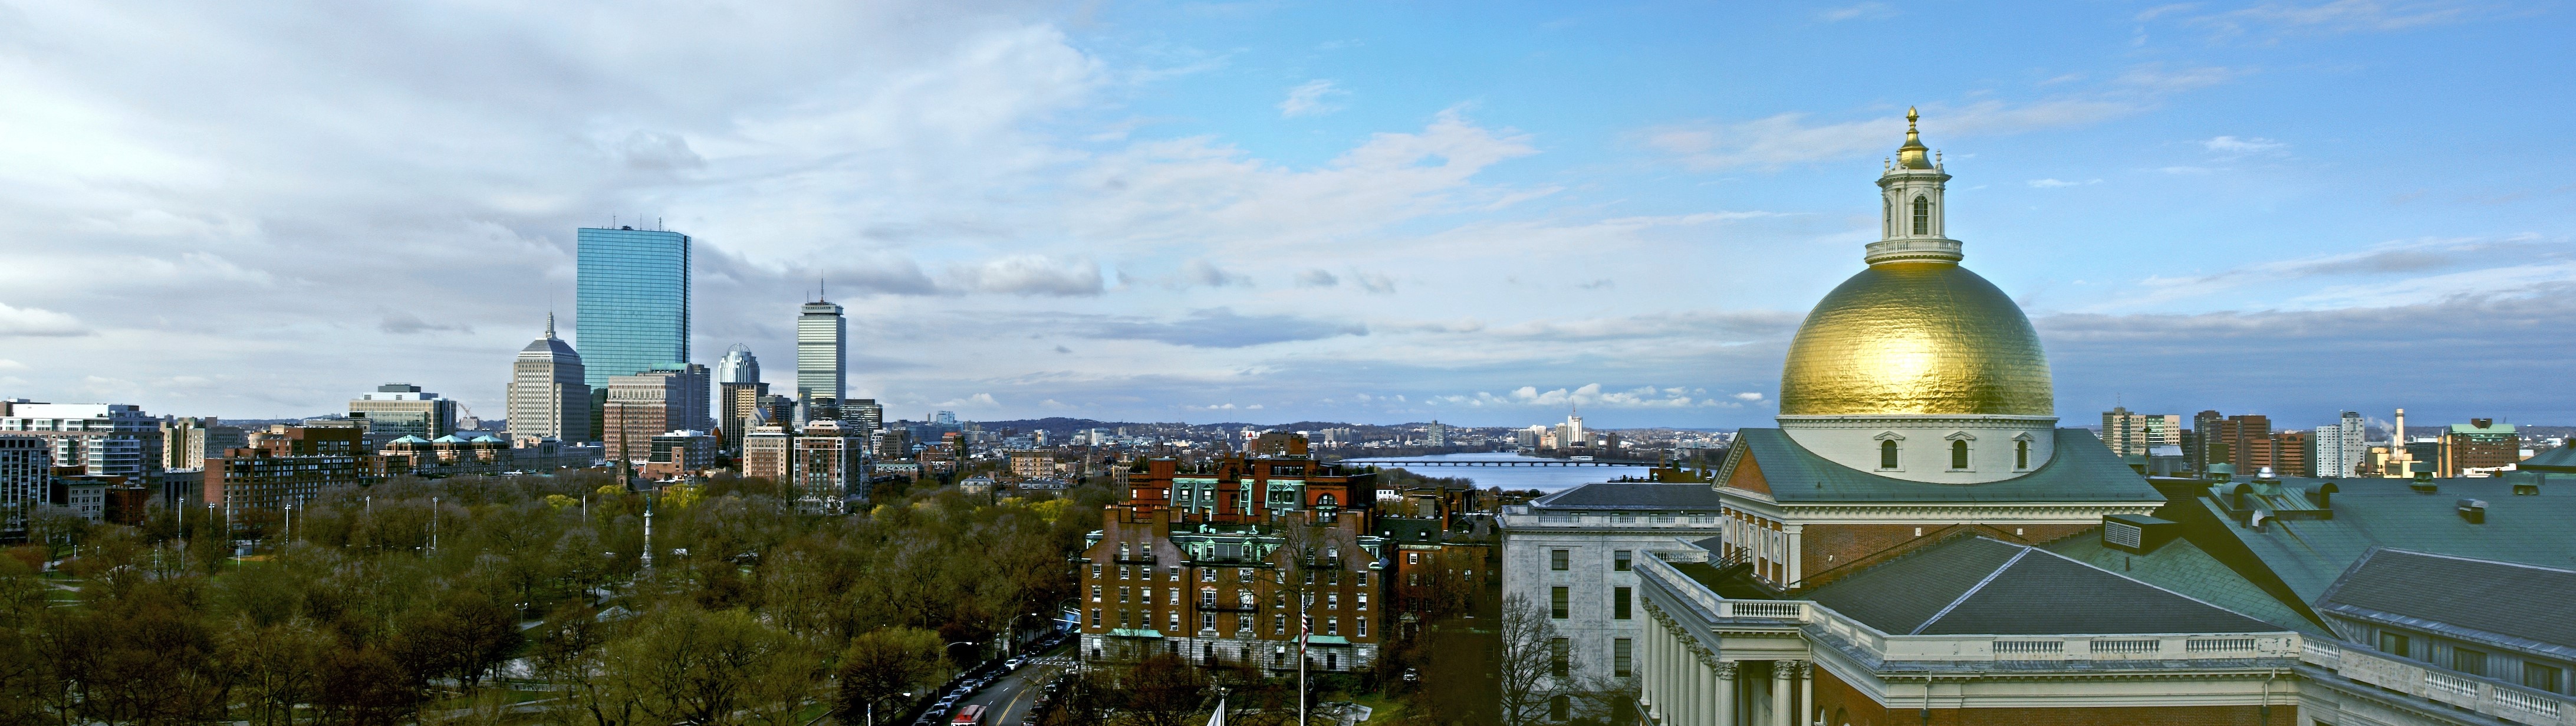 Panorama of Boston with Massachusetts State House dome